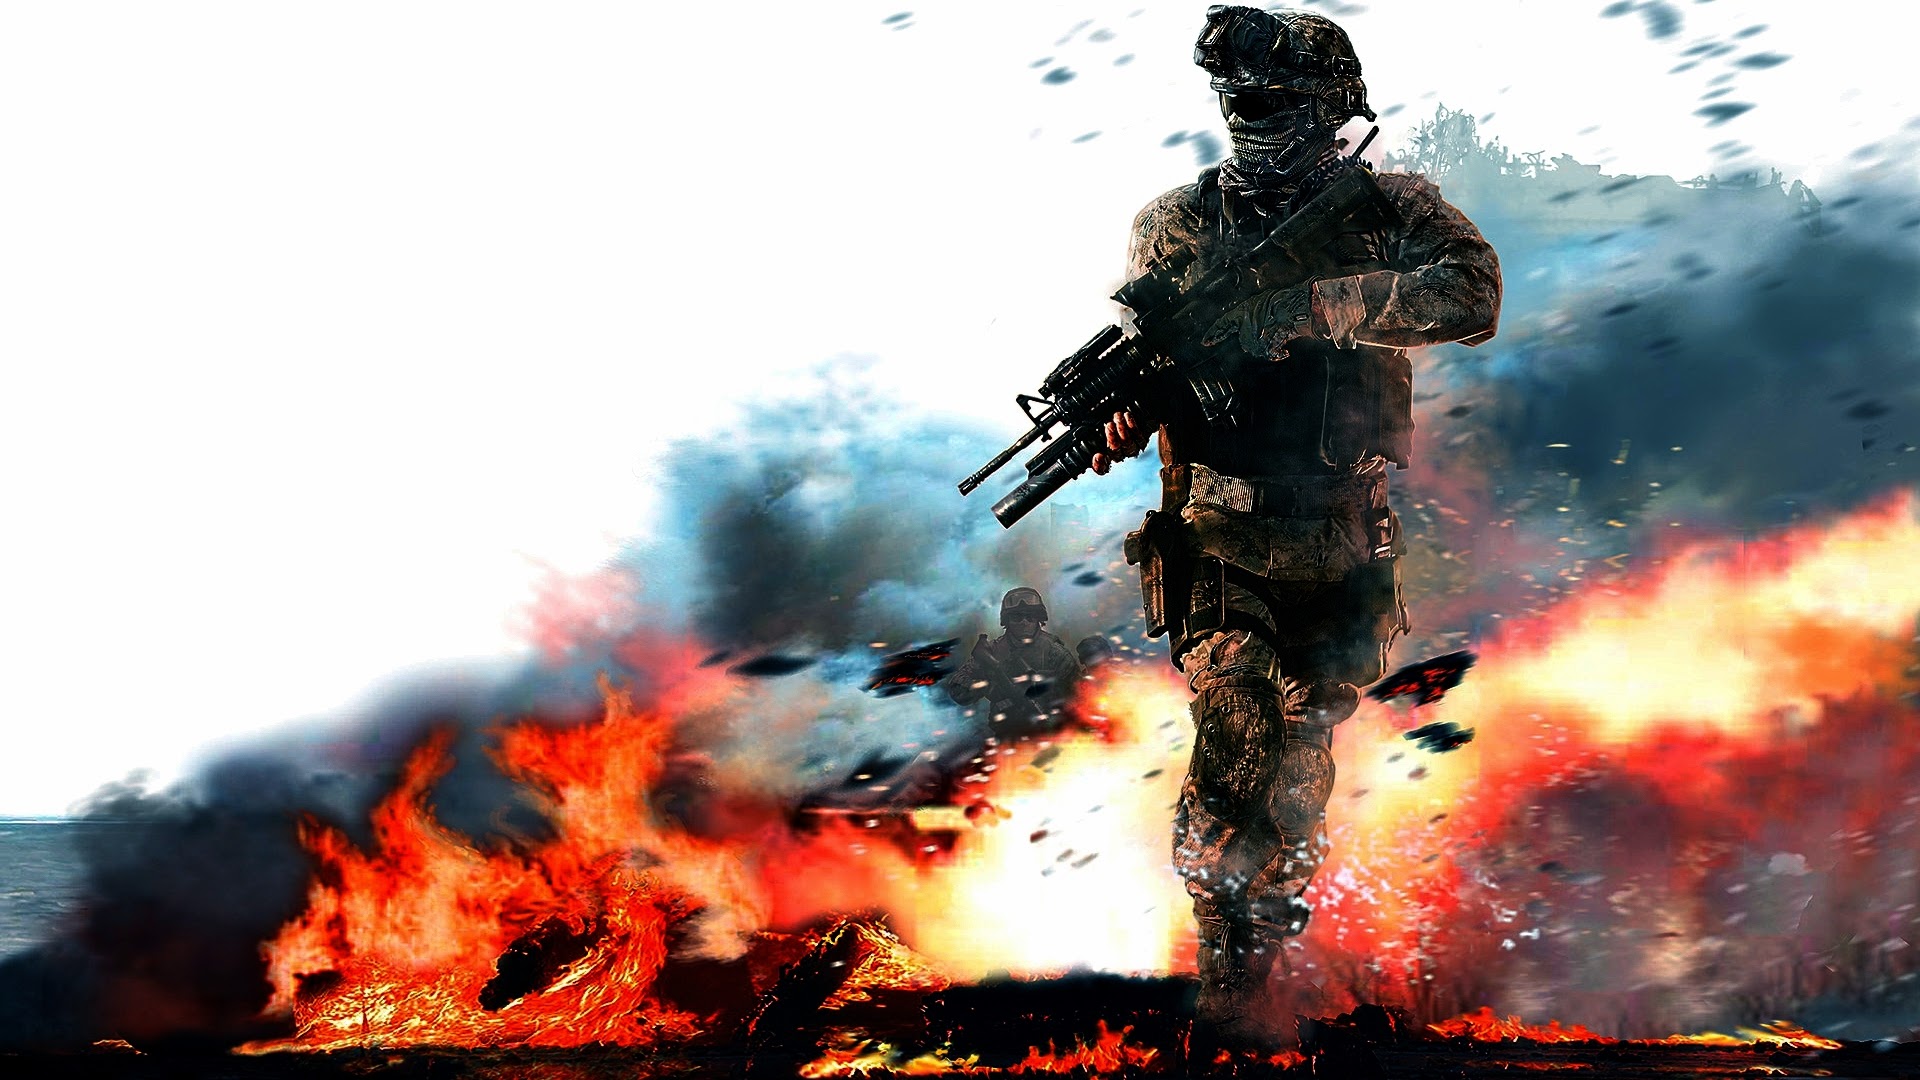 HD Best Call of Duty Video Game Wallpapers Full Size ...